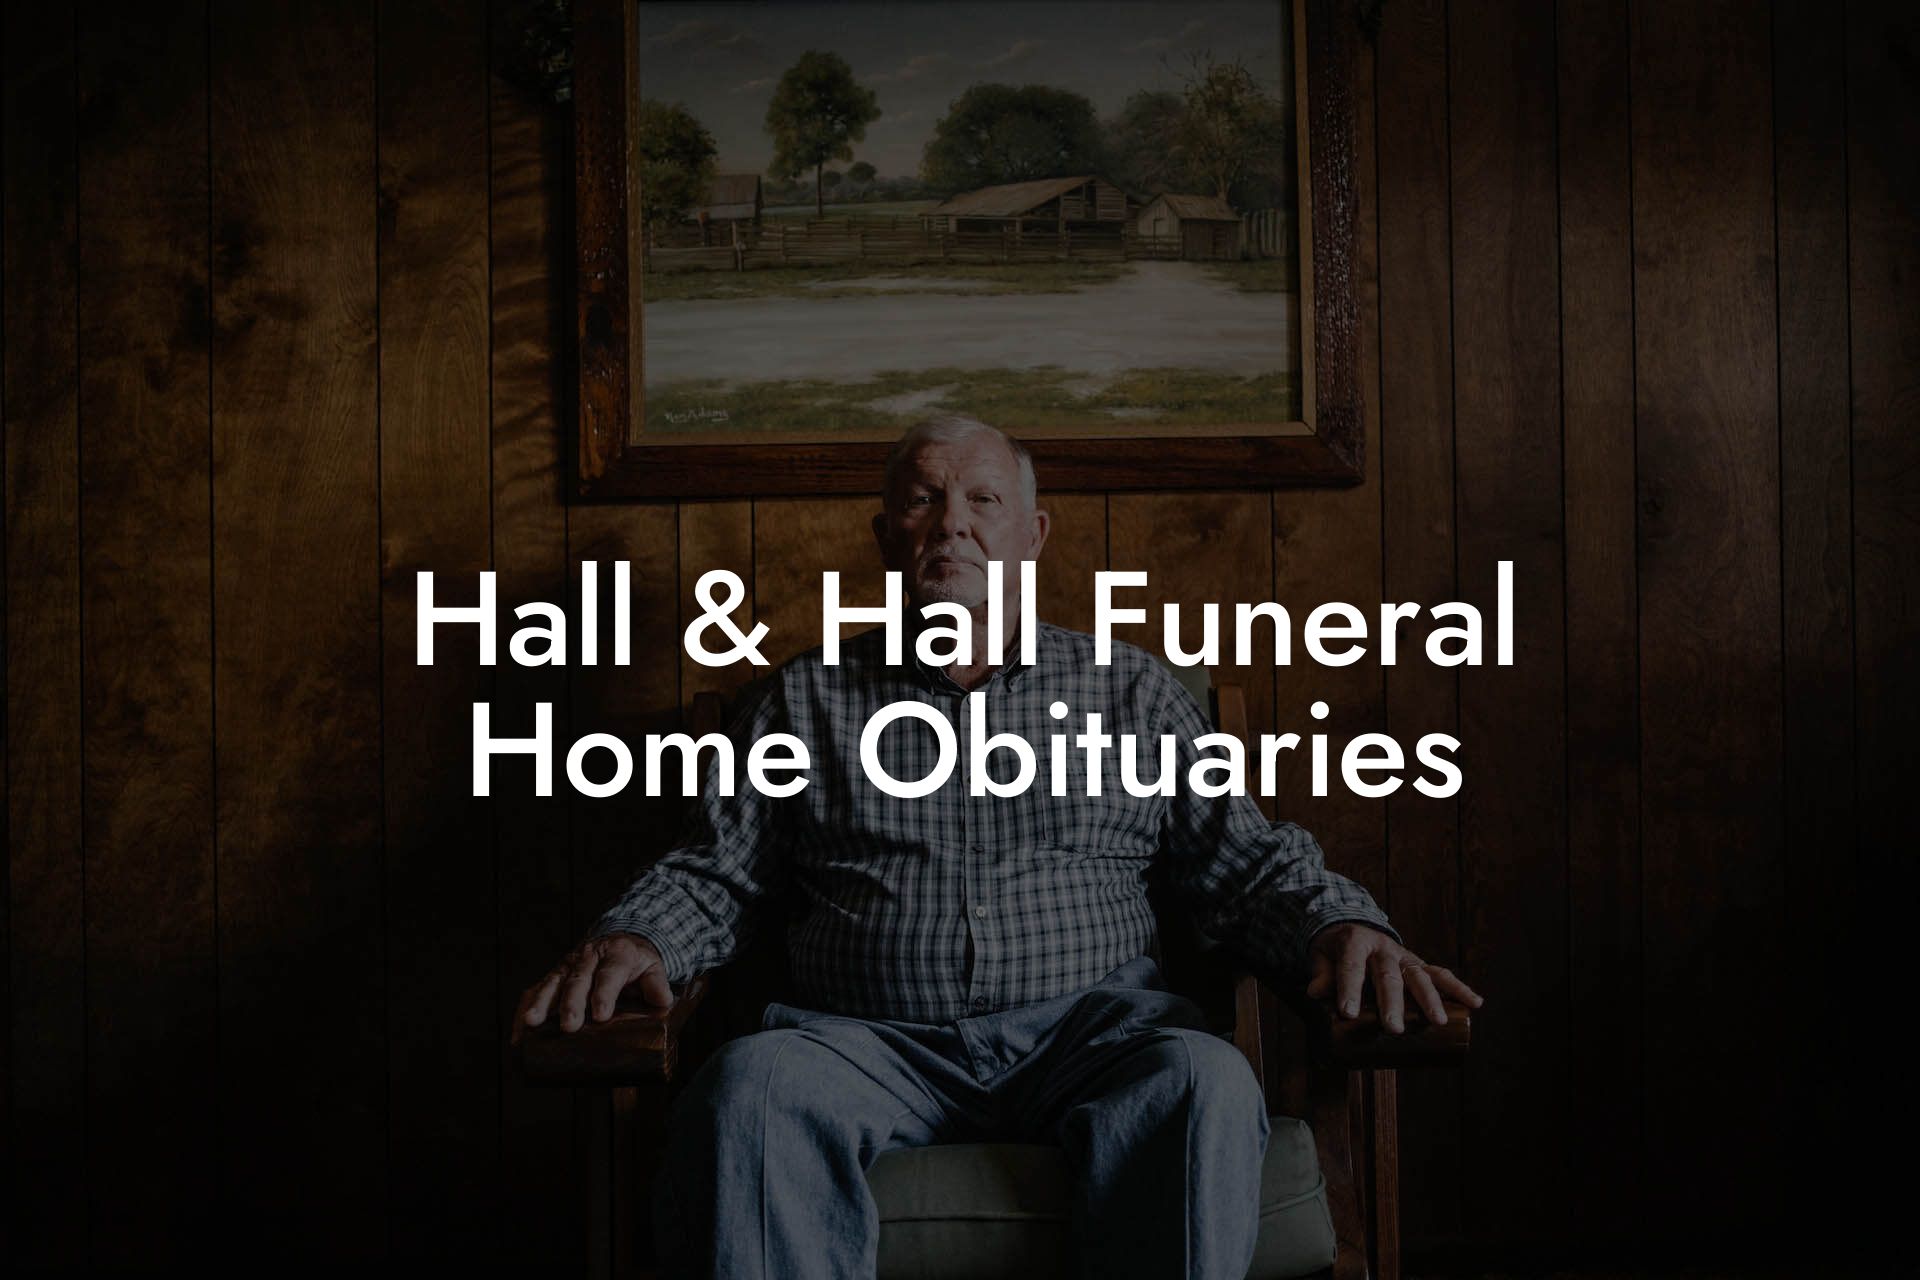 Hall & Hall Funeral Home Obituaries